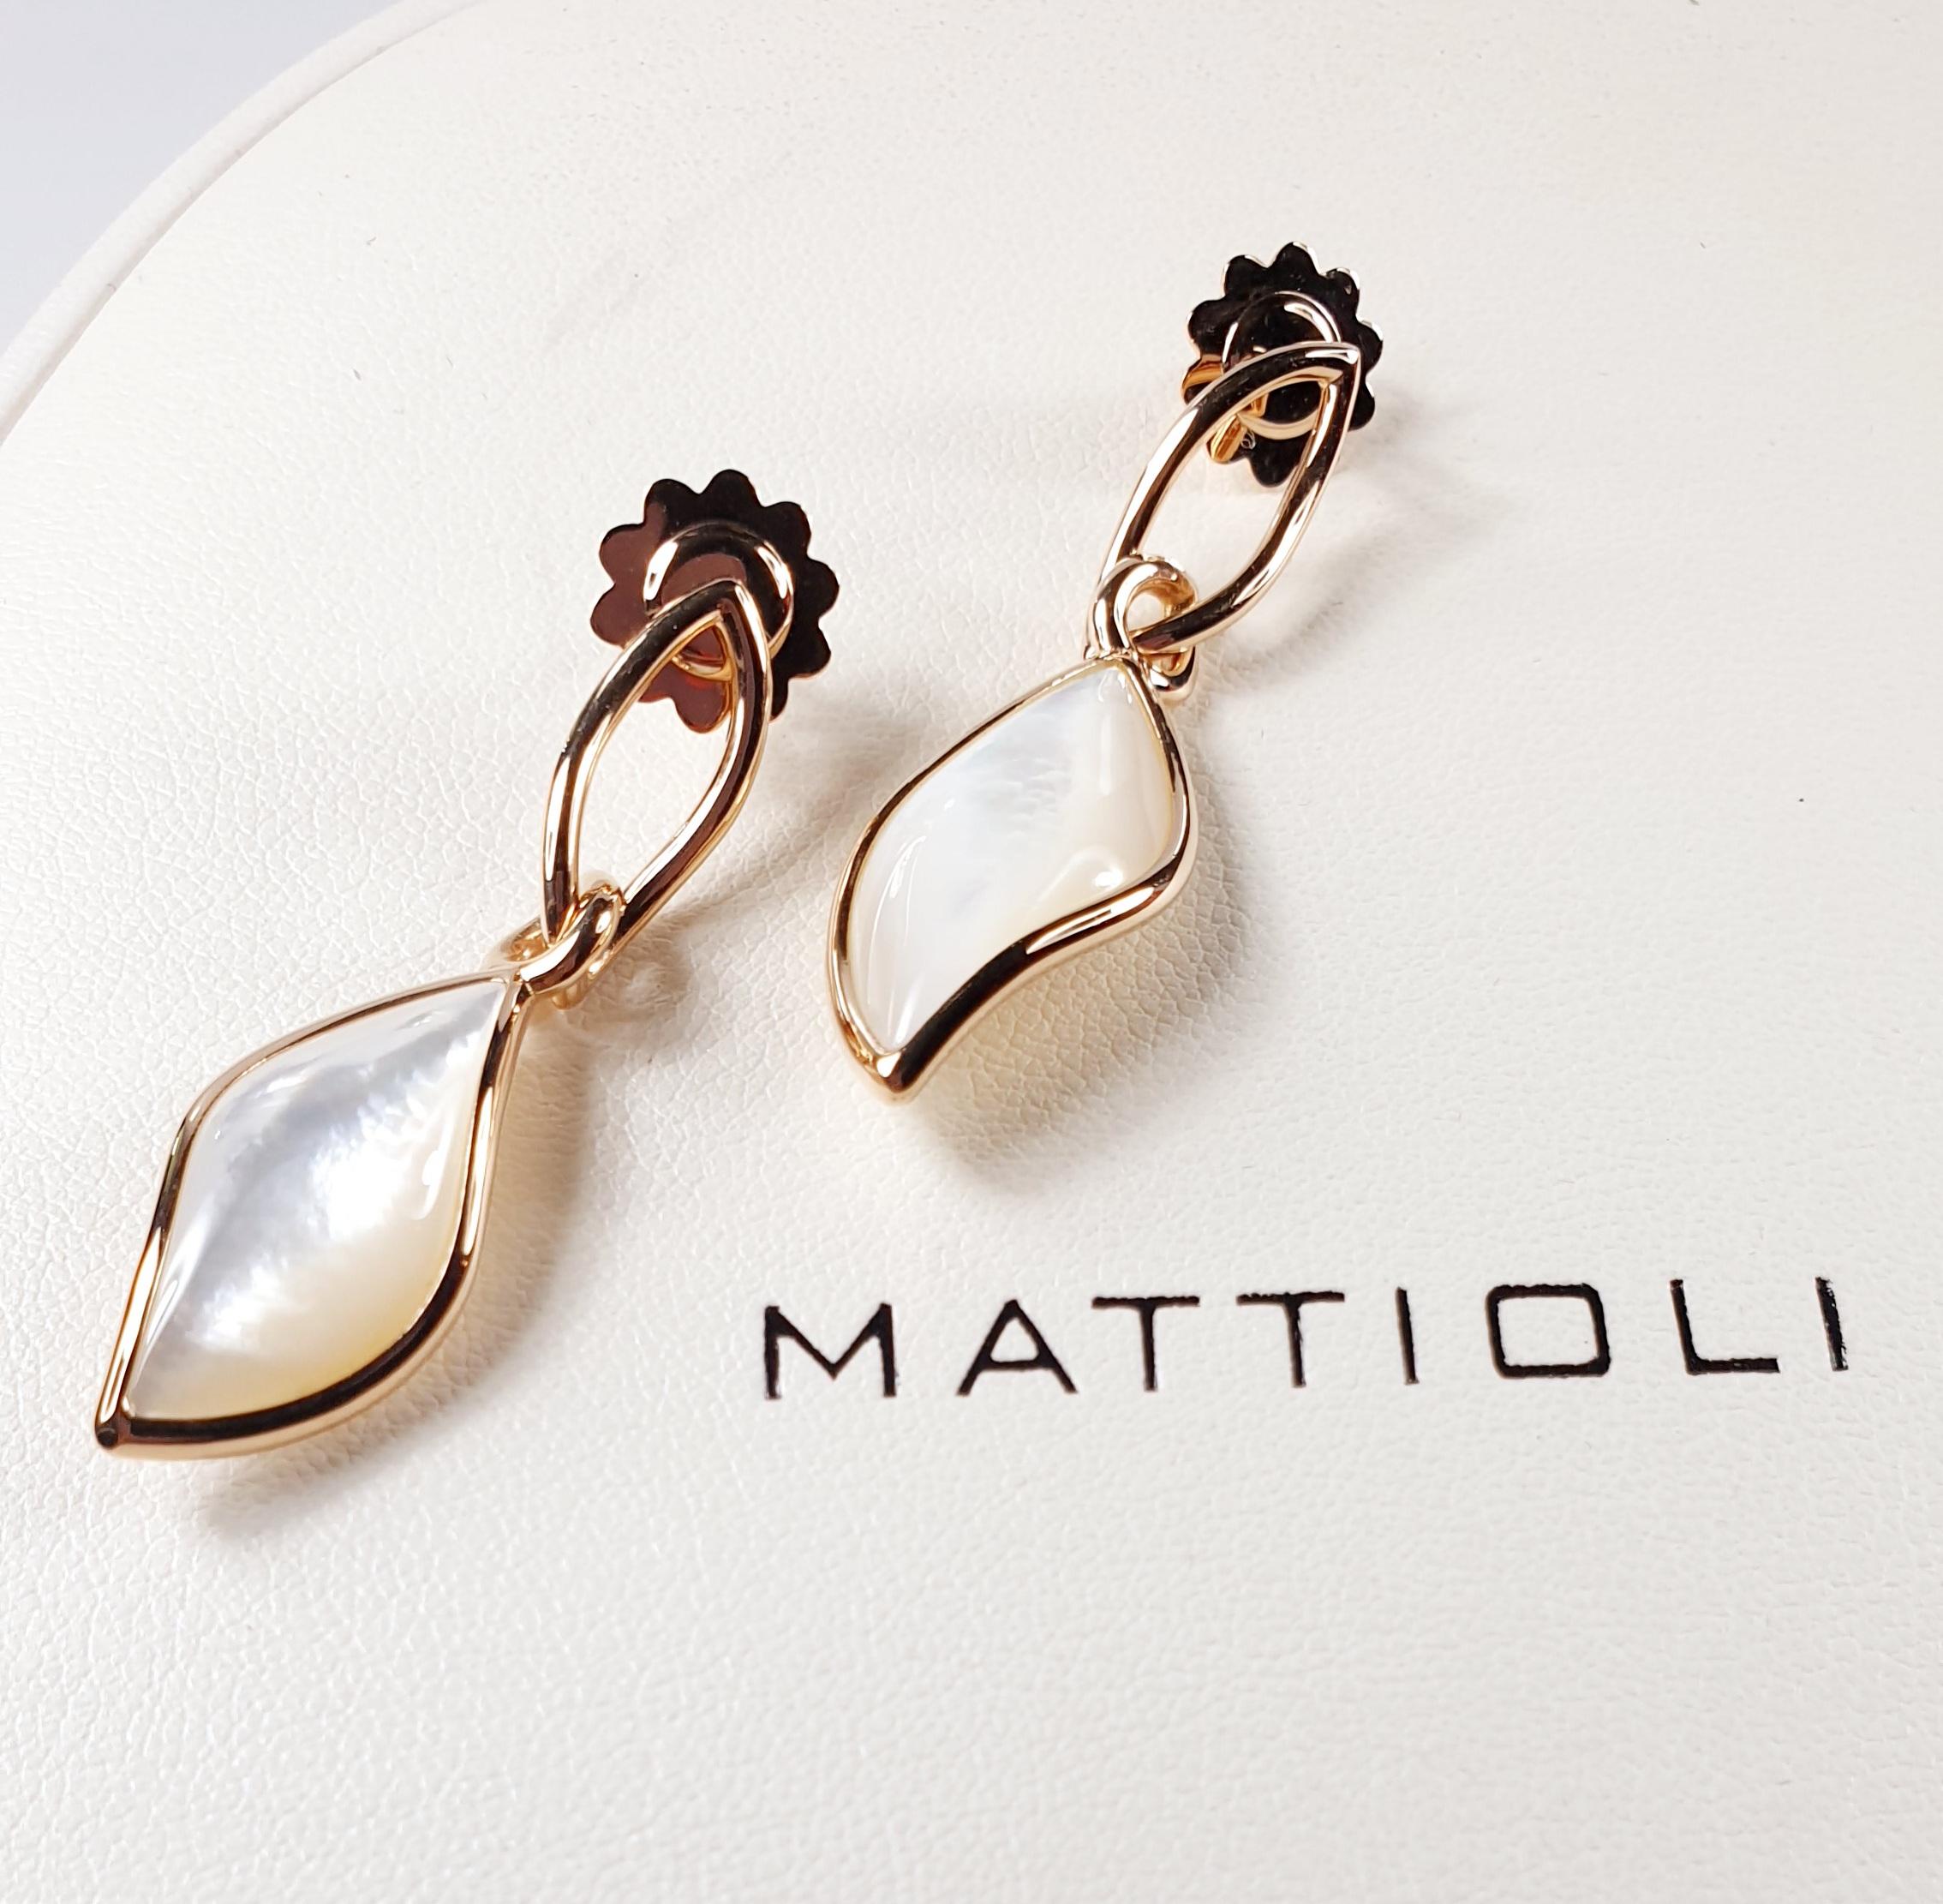 Mattioli Navettes earrings in 18 k rose gold and mother of pearl 
Lengh  4,5 cm  1,77 inches

Important information for this ORDER !
Request availability if in stock inmediate shipping
If need production time is 4-5 weeks 

READY TO SHIP
*Shipment